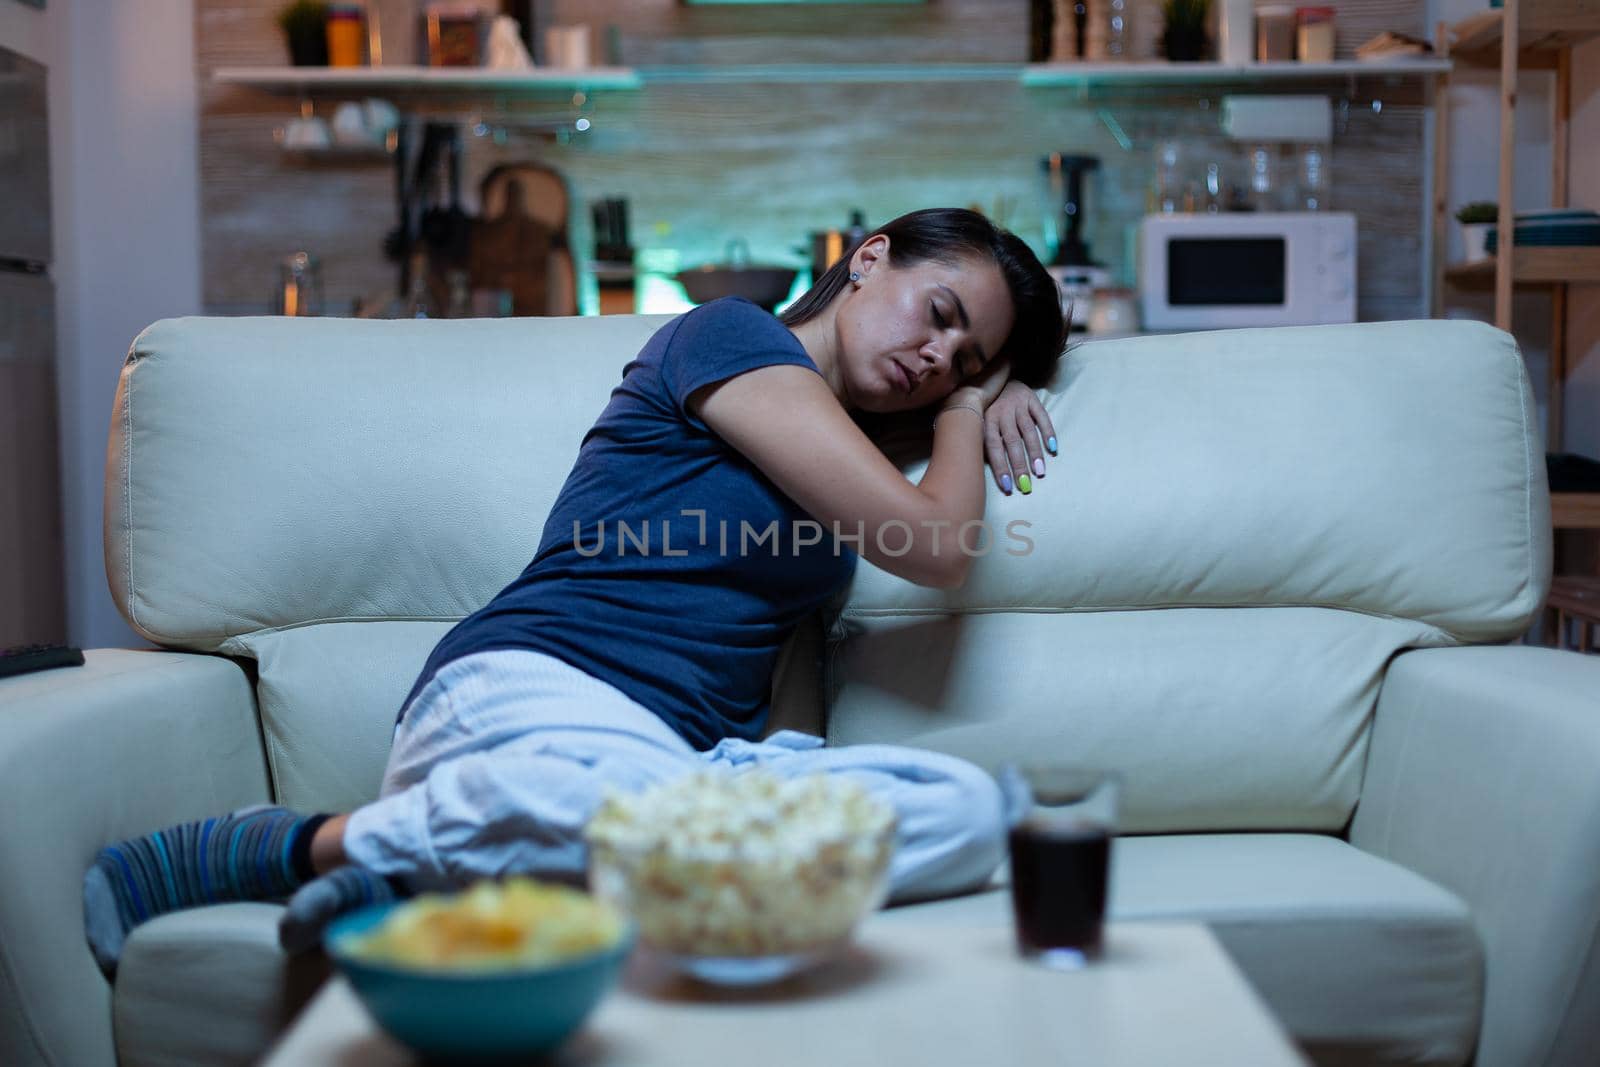 Portrait of woman sleeping on couch in living in front of television. Tired exhausted lonely sleepy lady in pajamas falling asleep sitting on cozy sofa, closing eyes while watching movie at night.